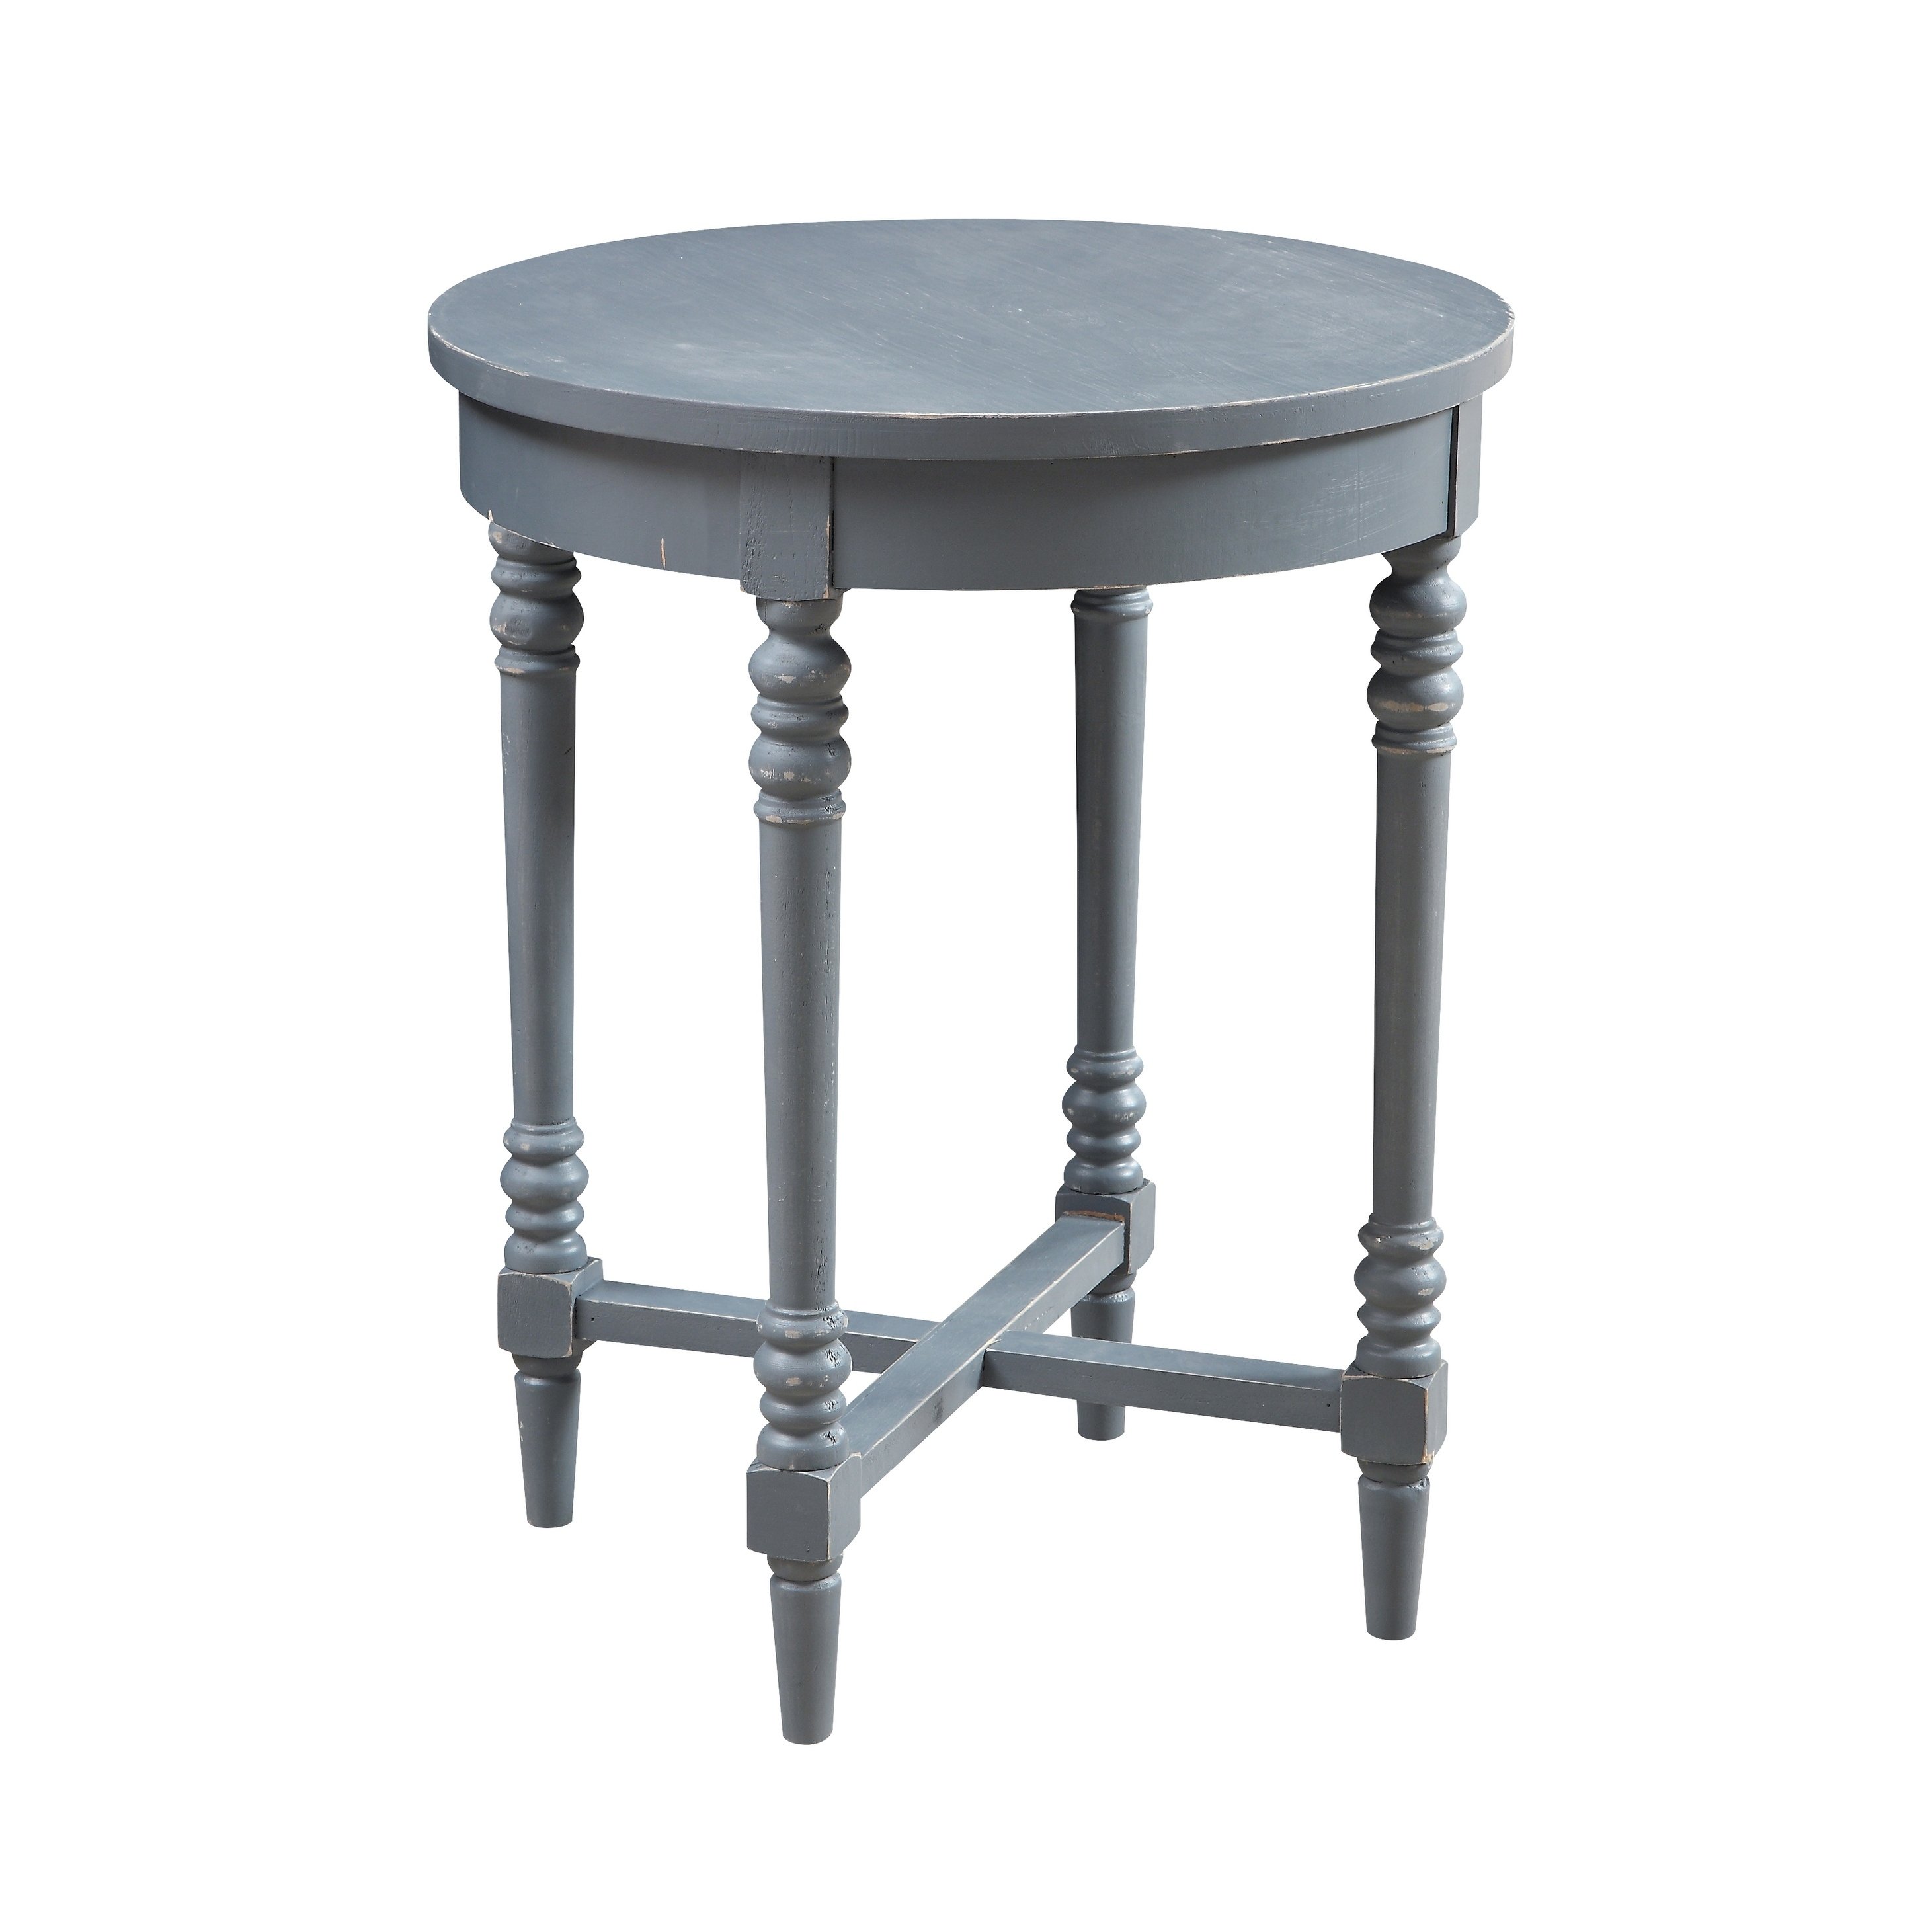 treasure trove small accent table free shipping today grey quality bedroom furniture acrylic waterfall console foyer storage floor transitions for uneven floors white sliding barn